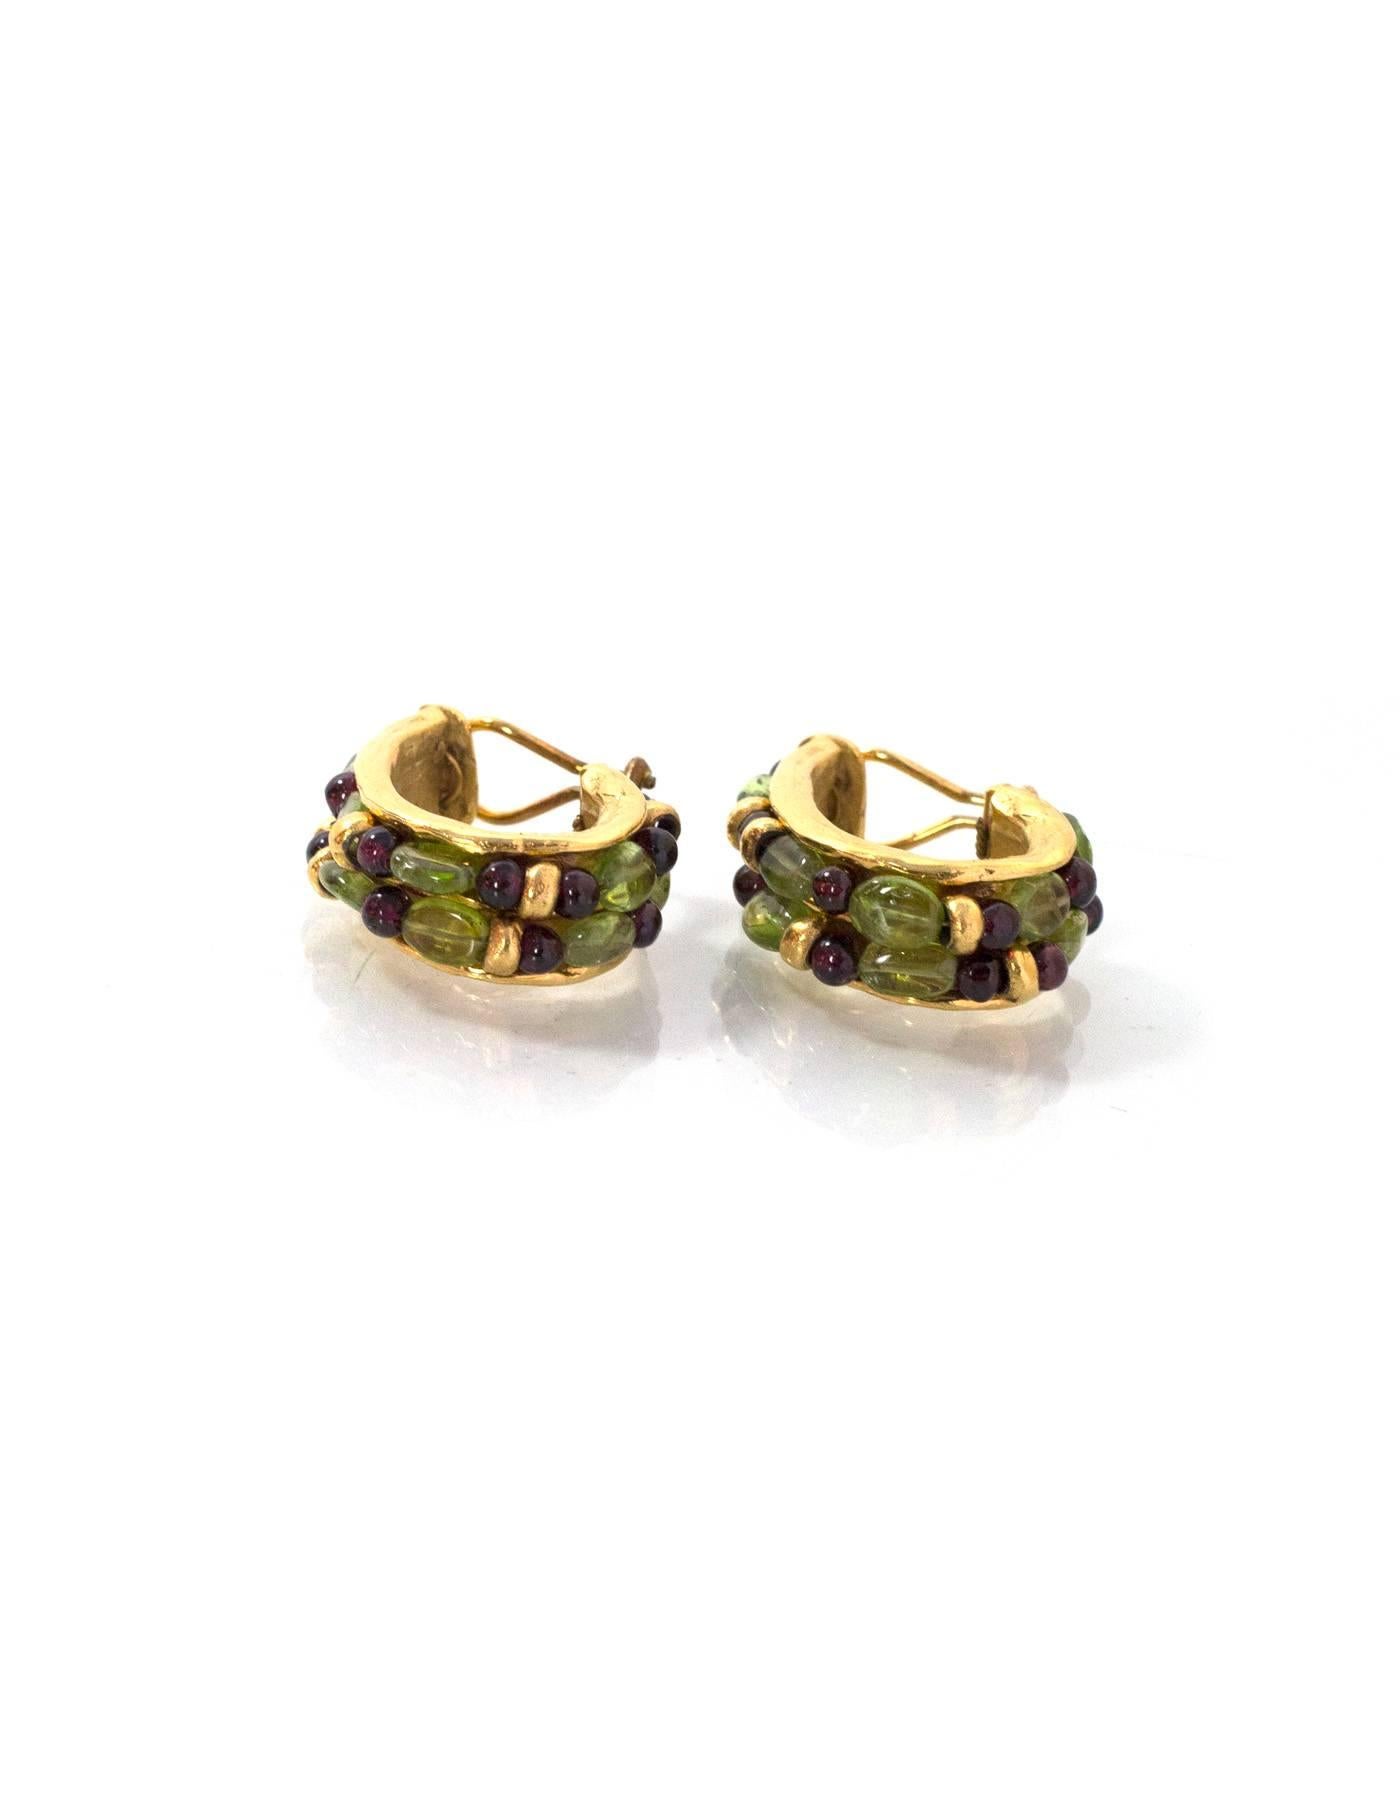 Goossens Paris Green & Red Gripoix Clip-On Earrings

In the 1950's, Robert Goossens worked with Coco Chanel to design jewelry to accompany her fashion designs.  Goossens would create original pieces for Mademoiselle Chanel made of real gold and